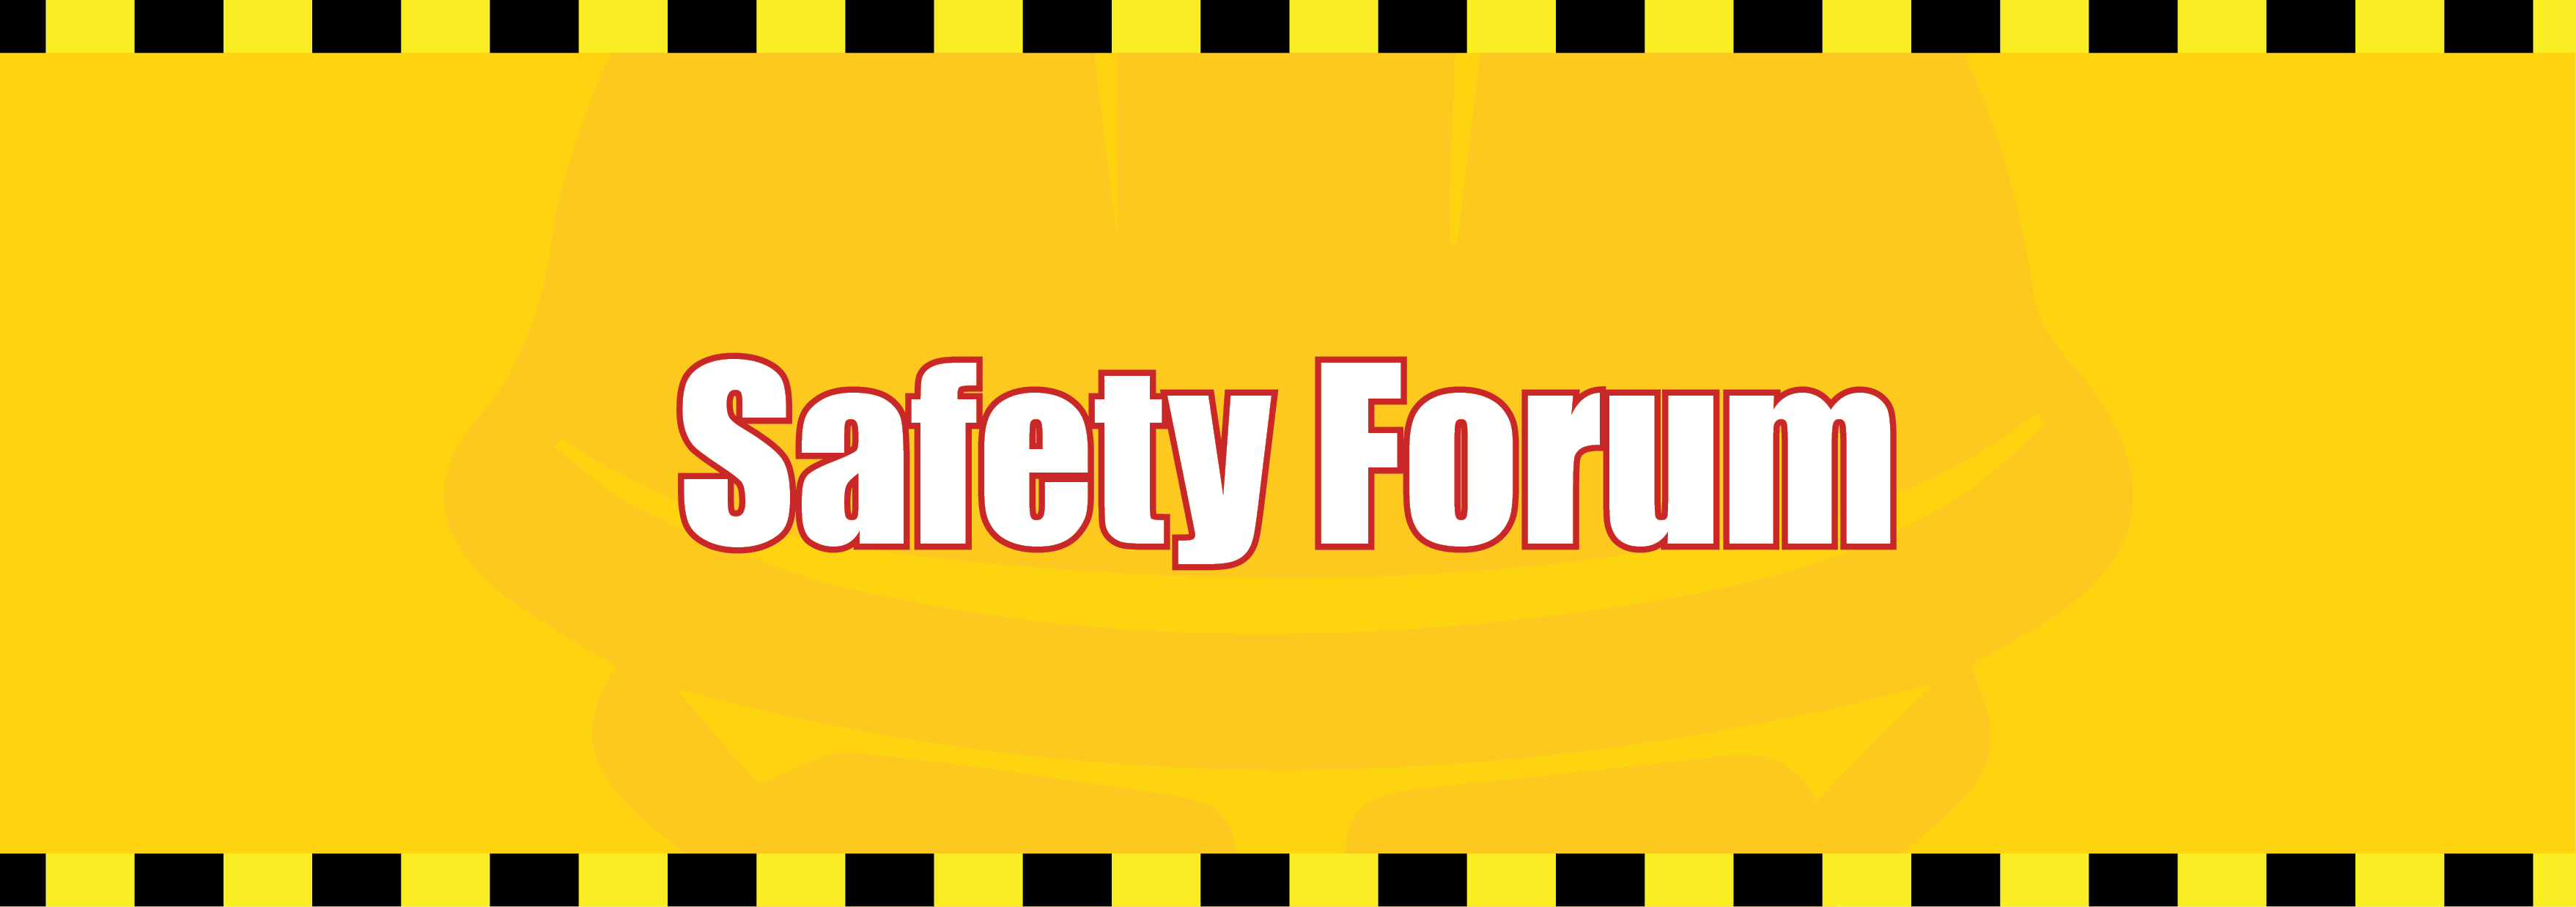 Monthly Safety Forum - OSHA Stand Down - Fall Prevention